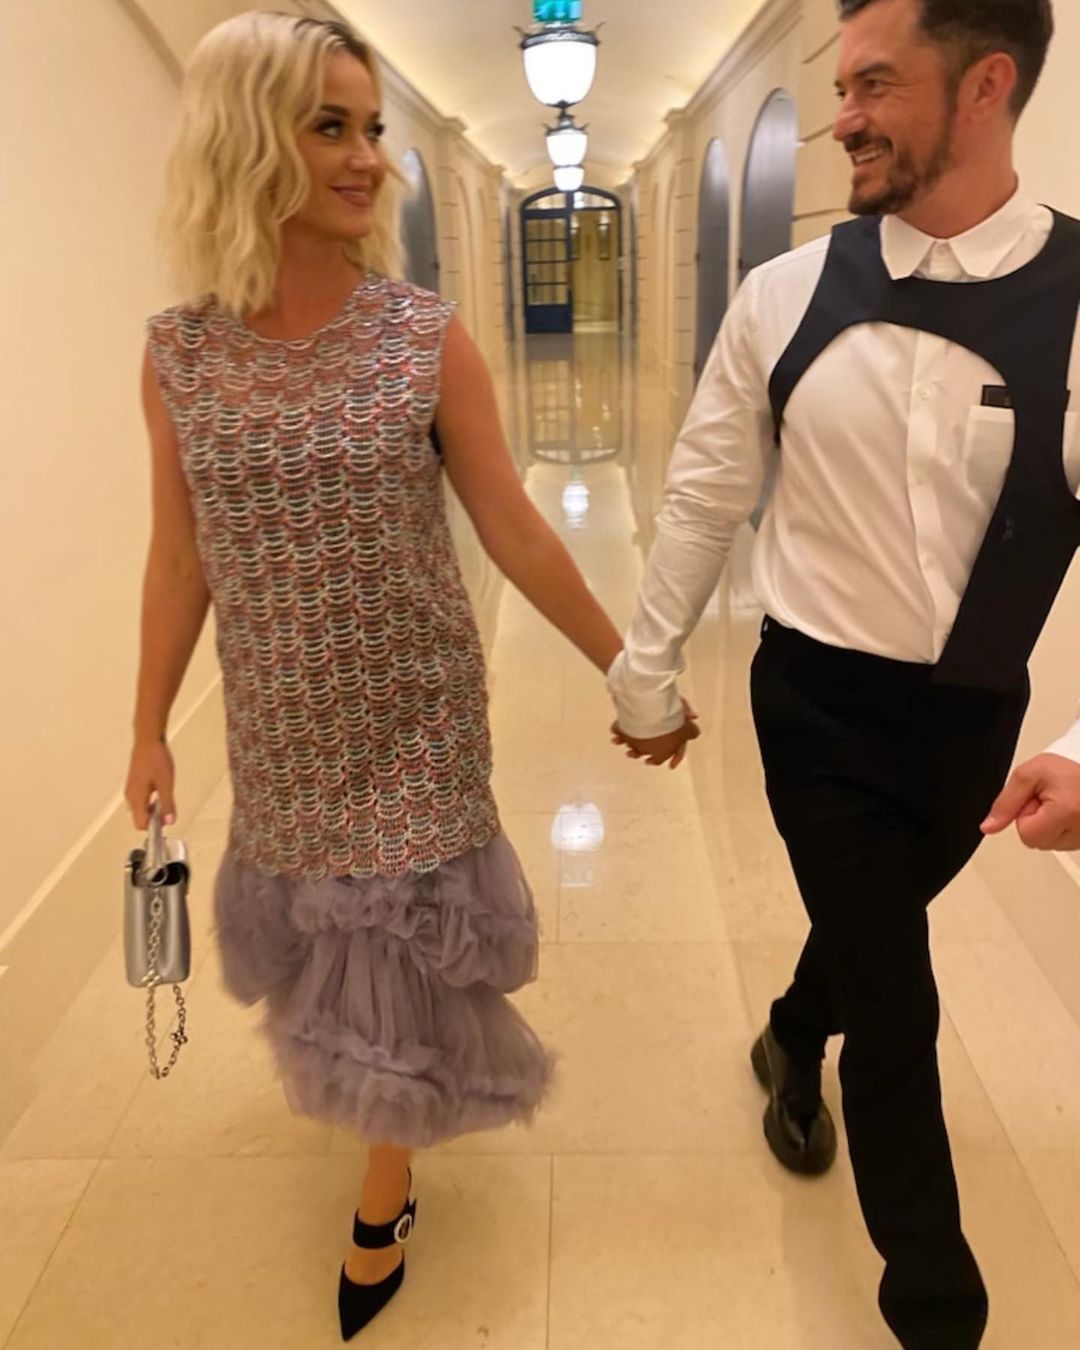 Katy Perry and Orlando Bloom walking in a hallway